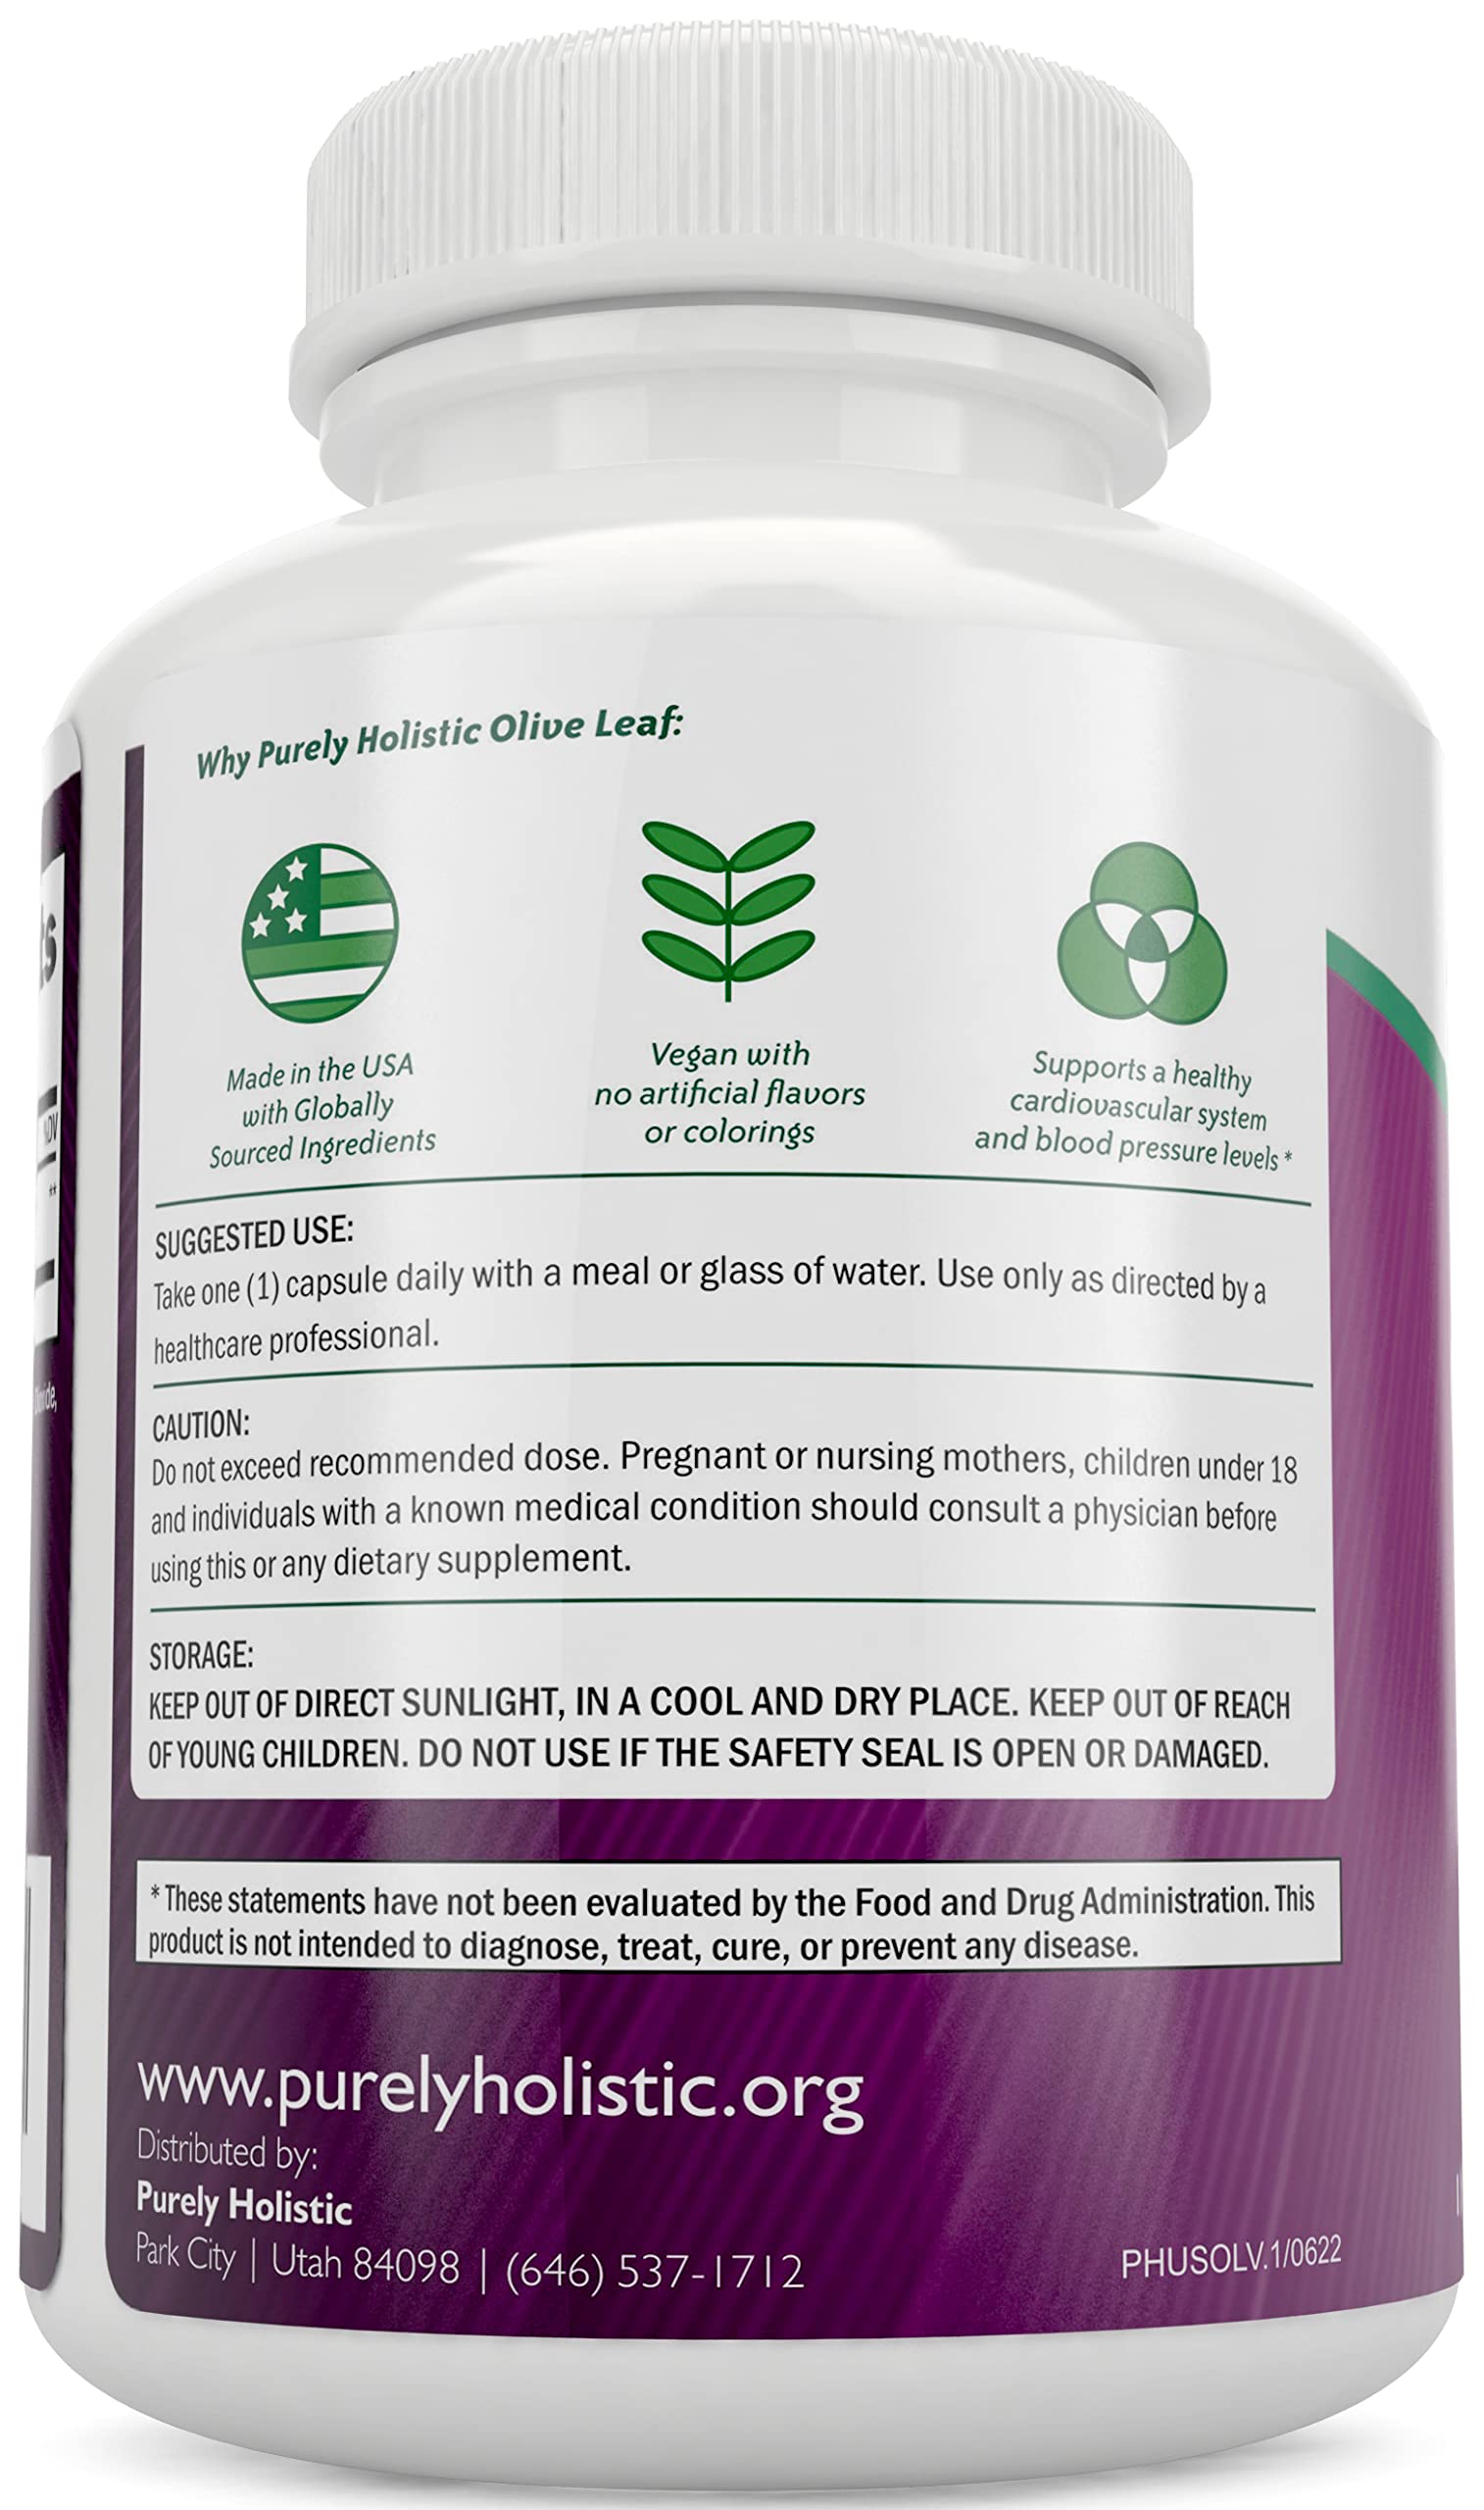 Purely Holistic Olive Leaf Extract 750mg (Non-GMO) Maximum Strength - 120 Vegan Capsules - 20% Oleuropein - 4 Month Supply - Immune System Support Supplement